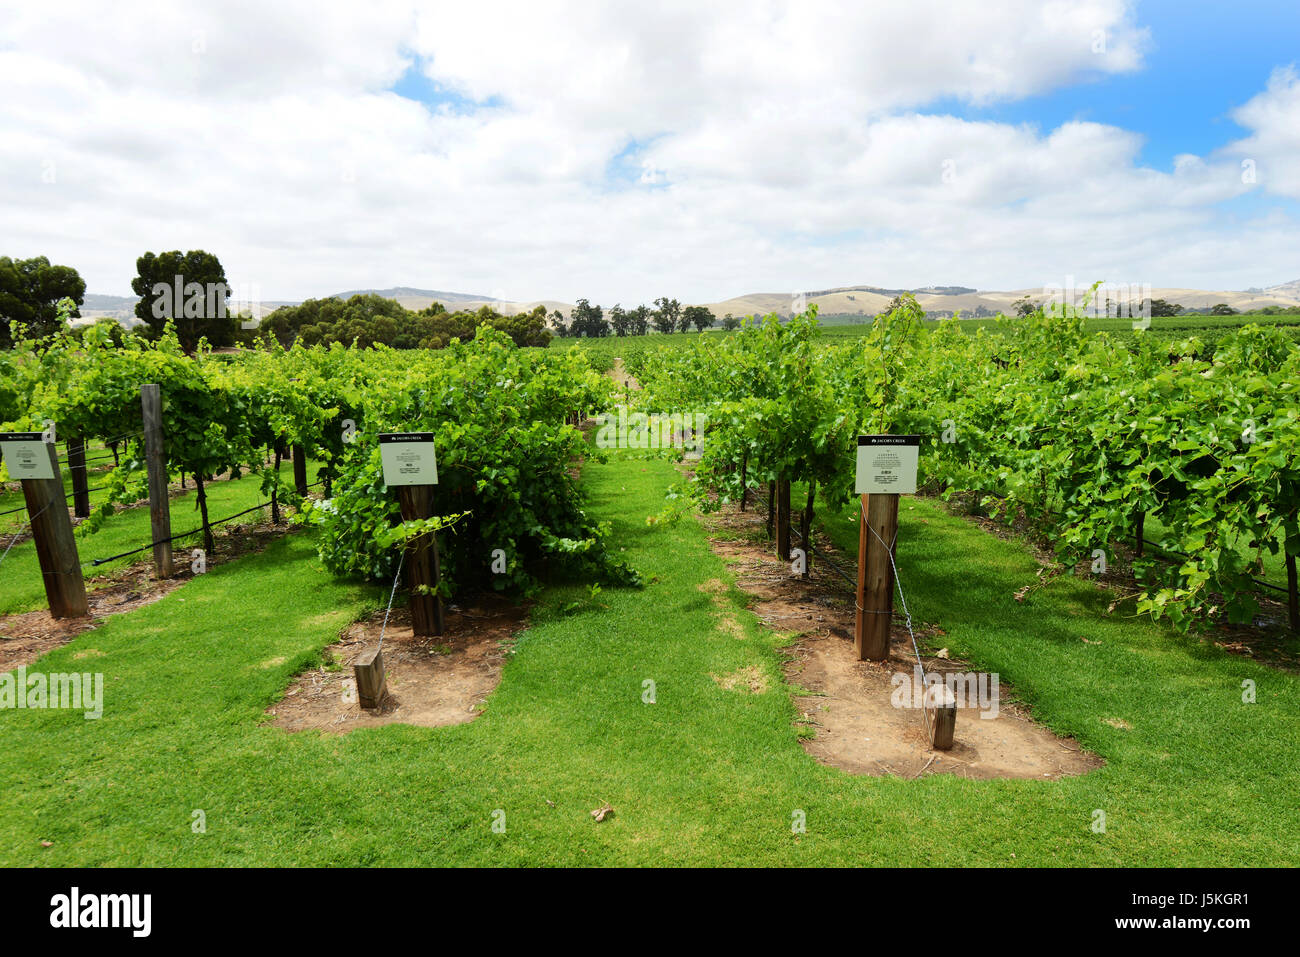 Vinyard trial plots at the Jacob Creek winery in South Australia. Stock Photo